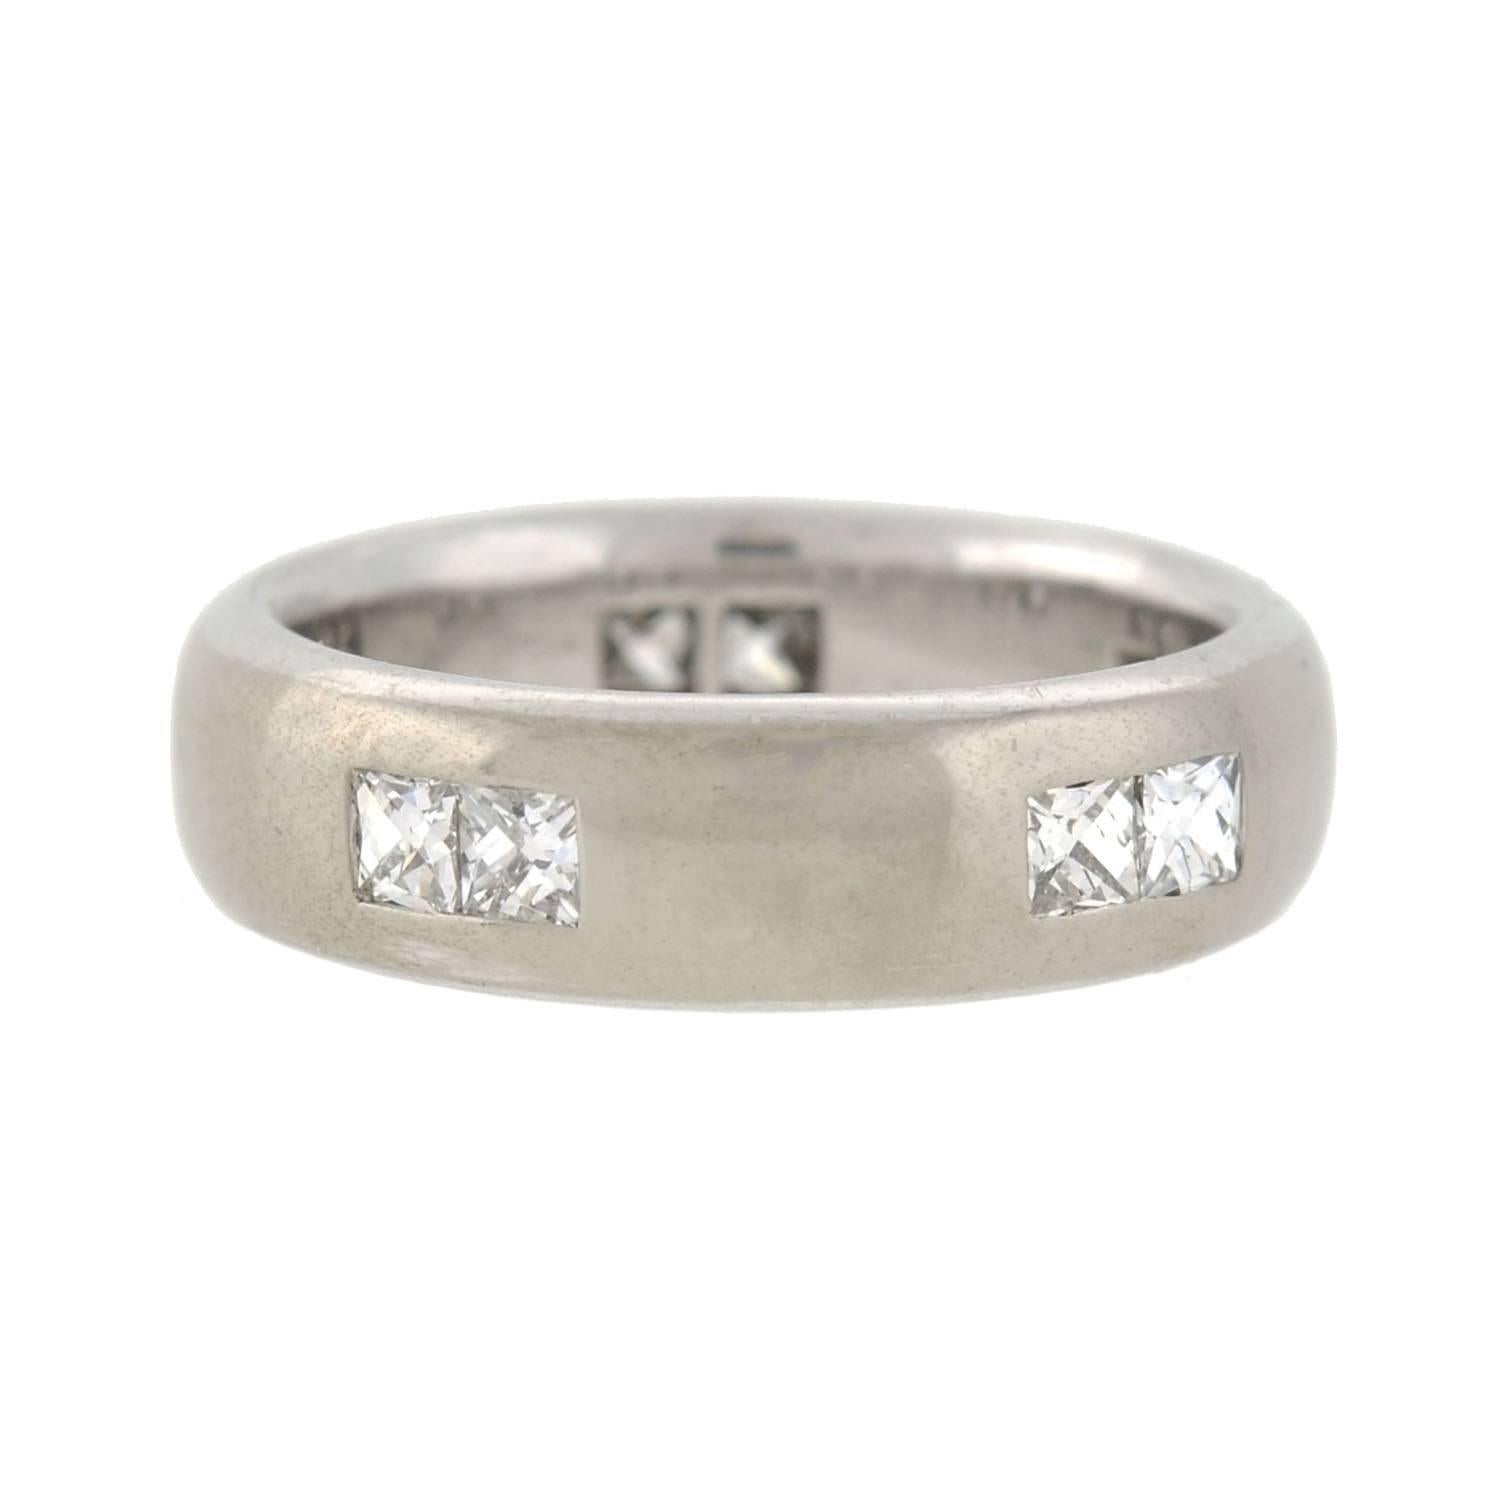 A fabulous Estate French Cut diamond band with a very unique look! Made of 18kt white gold, the band is fairly wide and has attractive beveled sides all the way around. A total of 10 sparkling diamonds decorate the outer surface of the ring, each